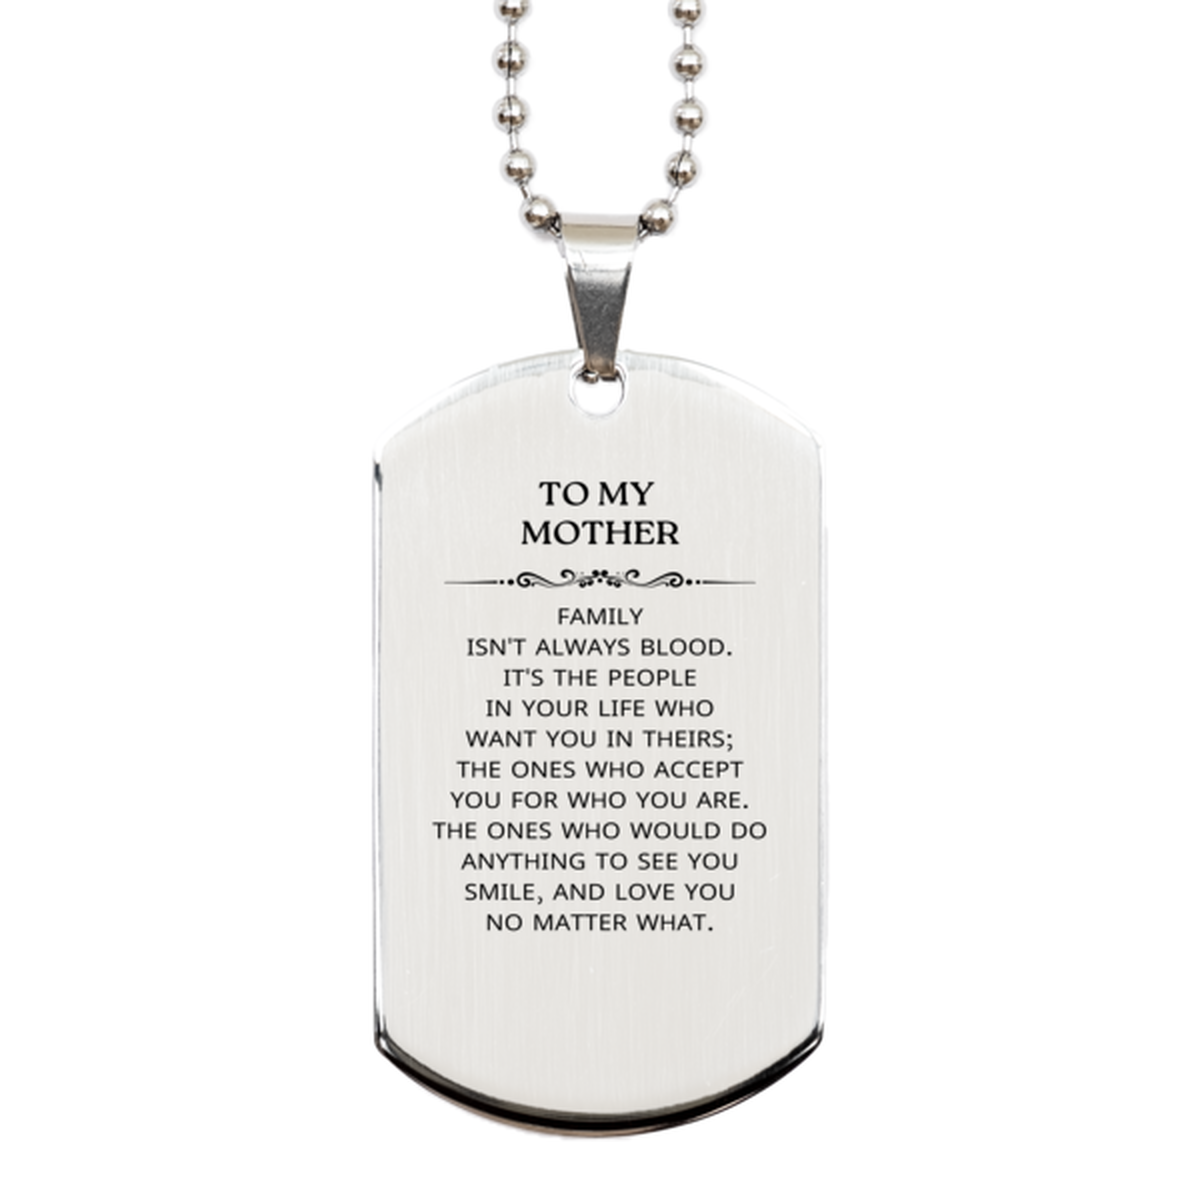 To My Mother Gifts, Family isn't always blood, Mother Silver Dog Tag, Birthday Christmas Unique Present For Mother